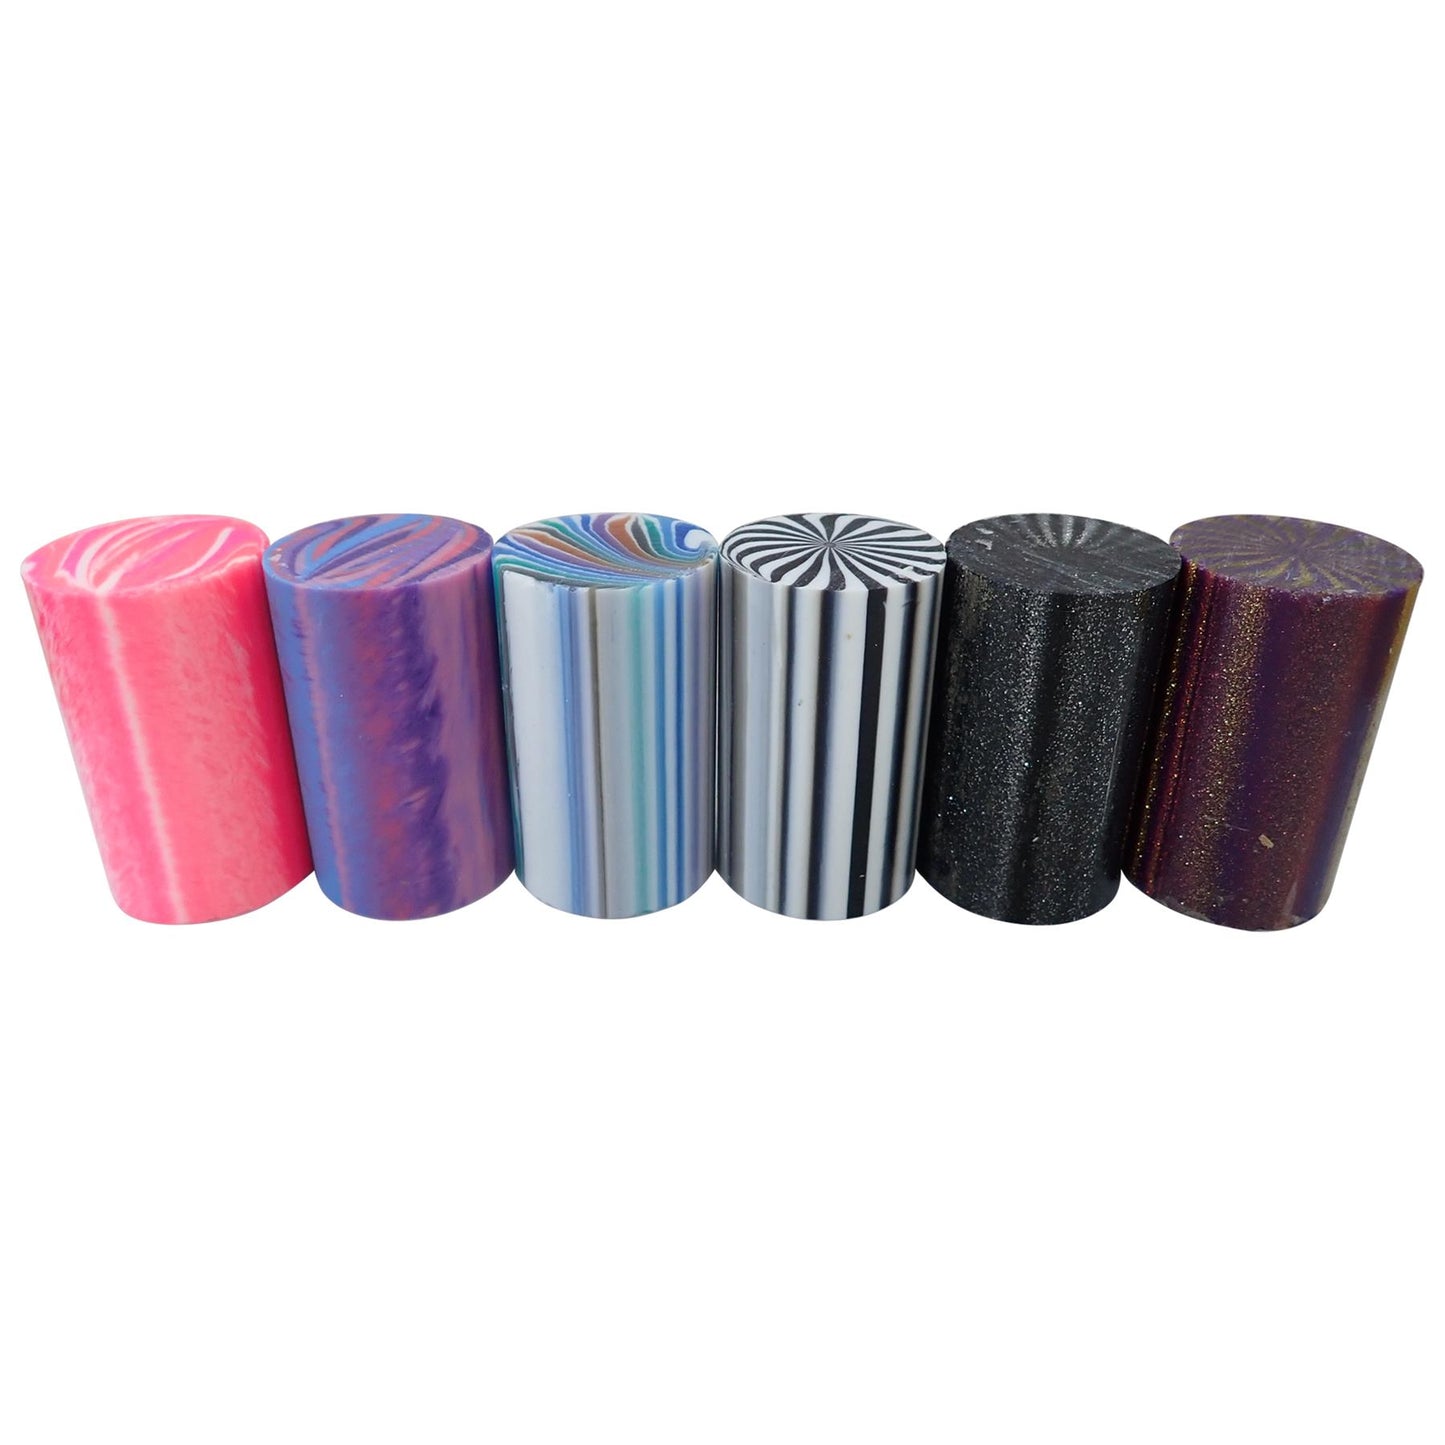 [Turners' Mill] Mixed Polyester Turning Blanks - 63.5x39x39mm, Set of 6